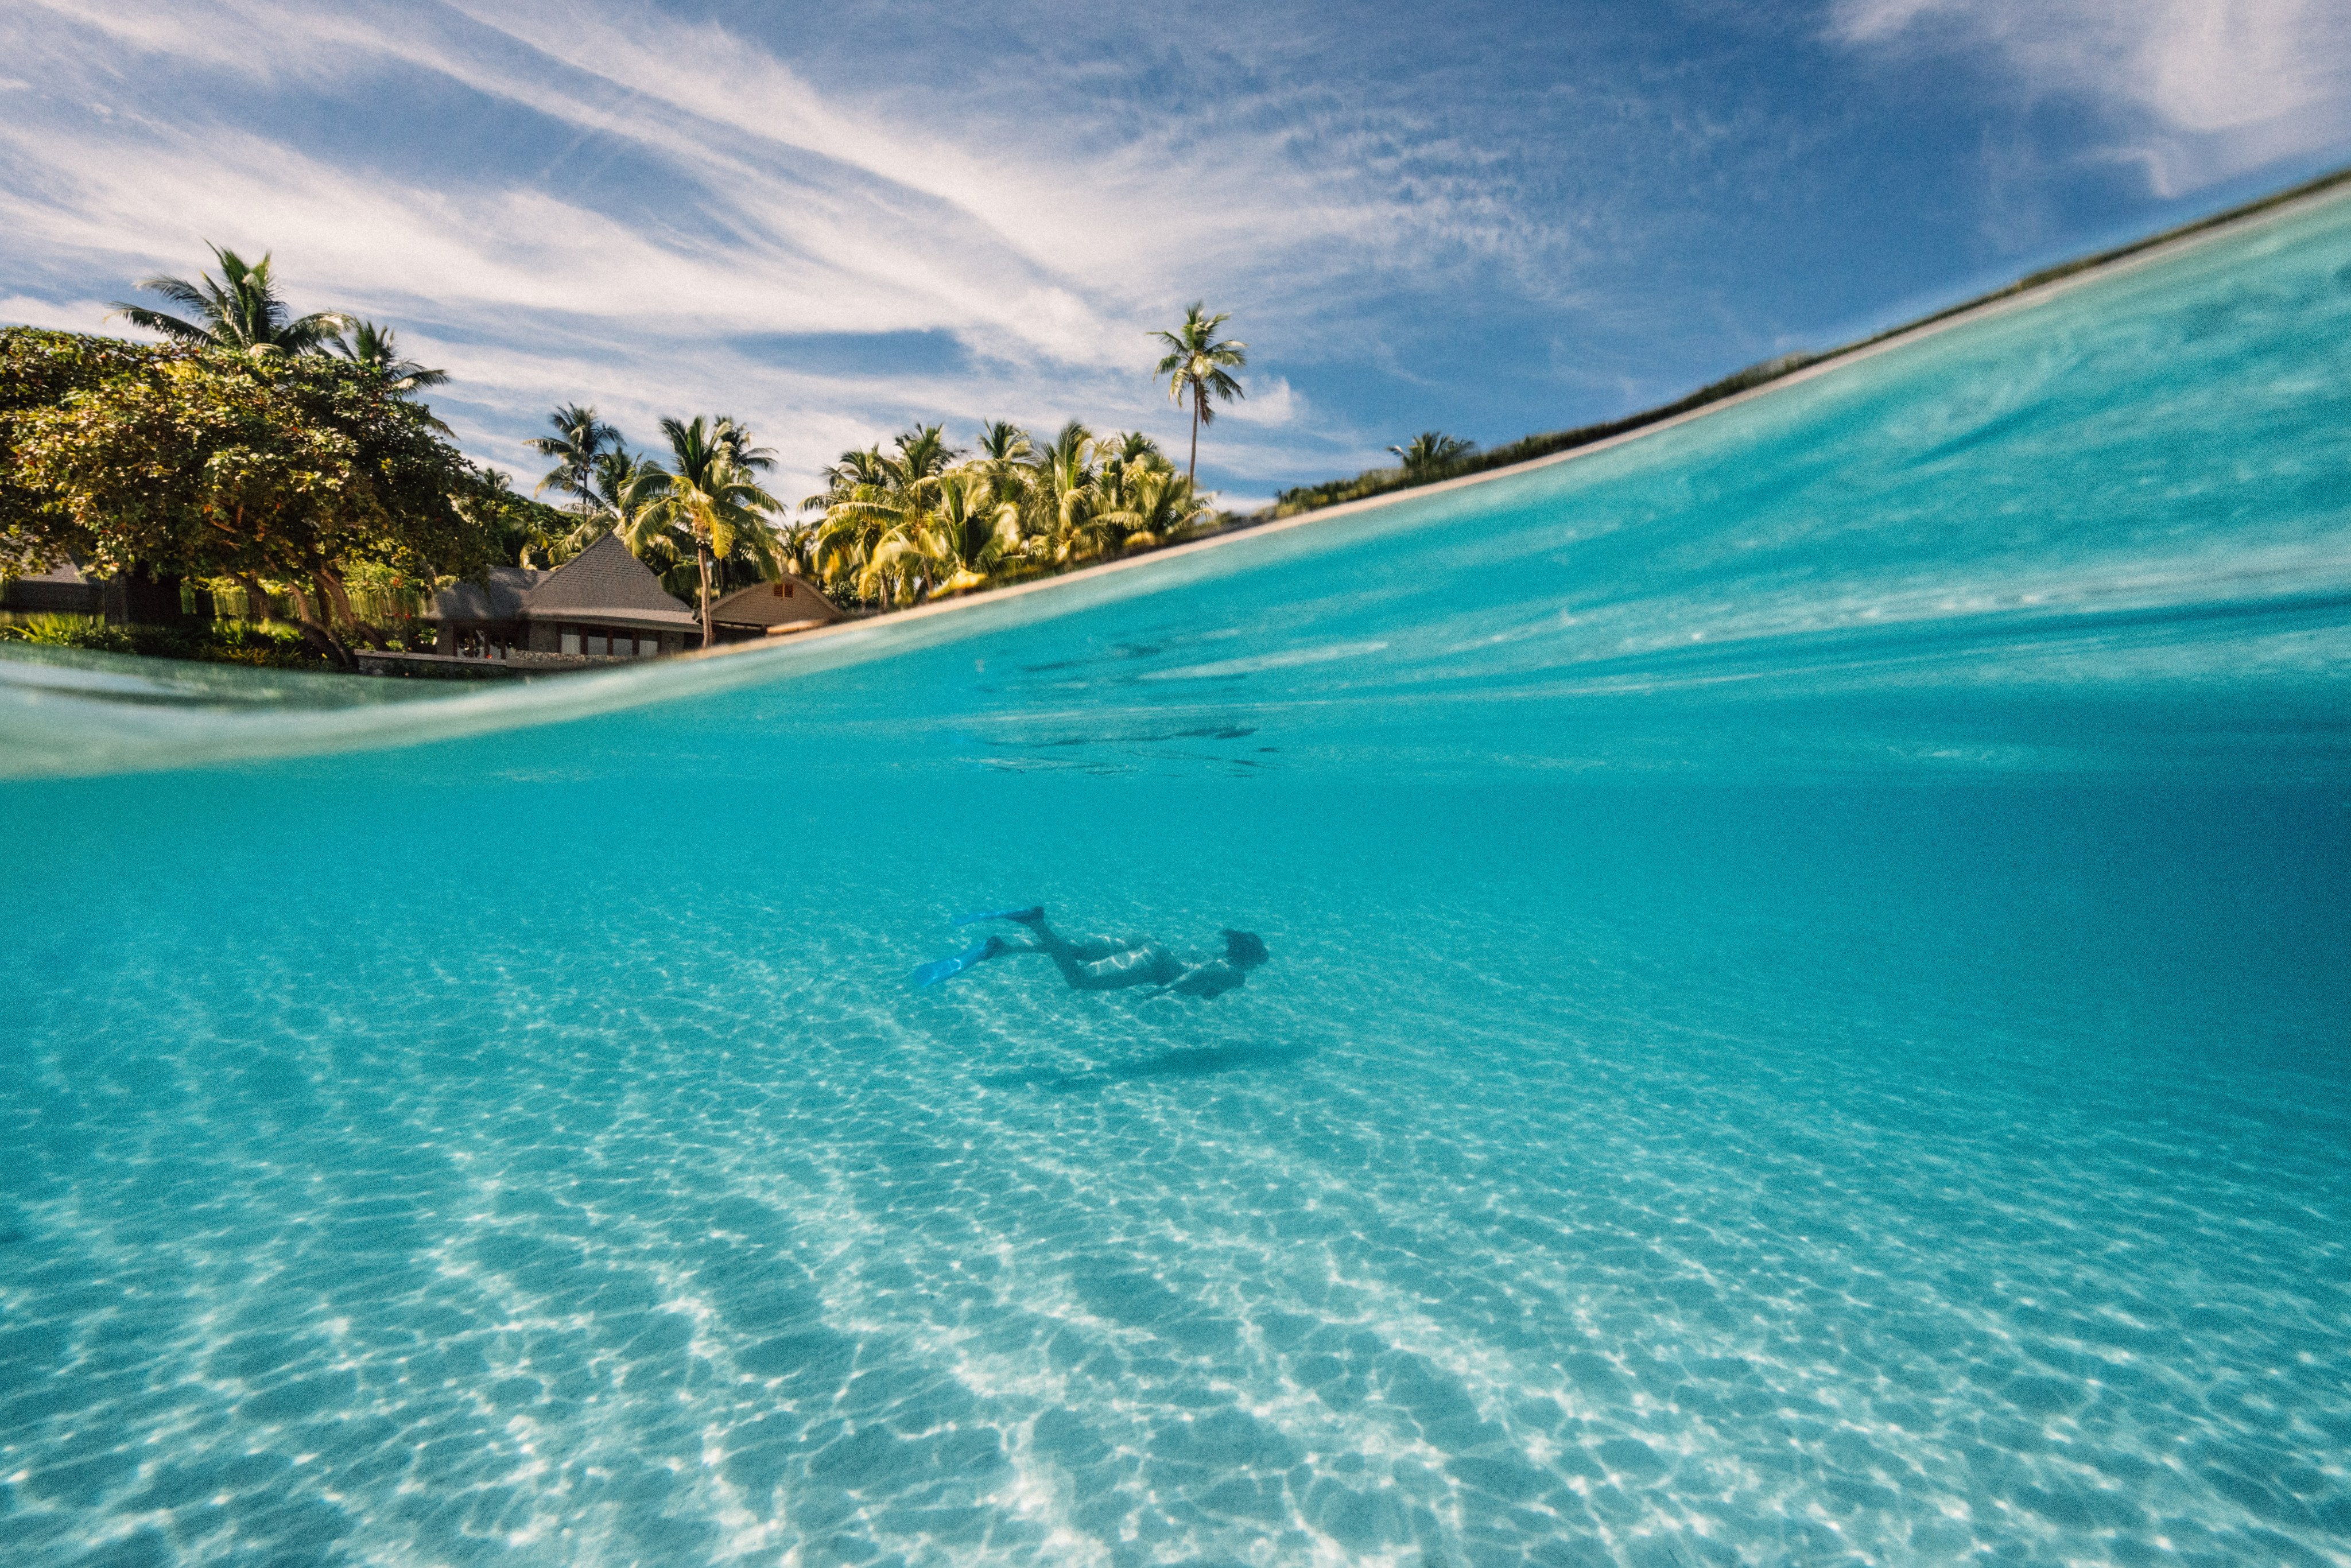 The Kokomo Private Island Fiji: it doesn’t get much more secluded than this. Photo: Handout